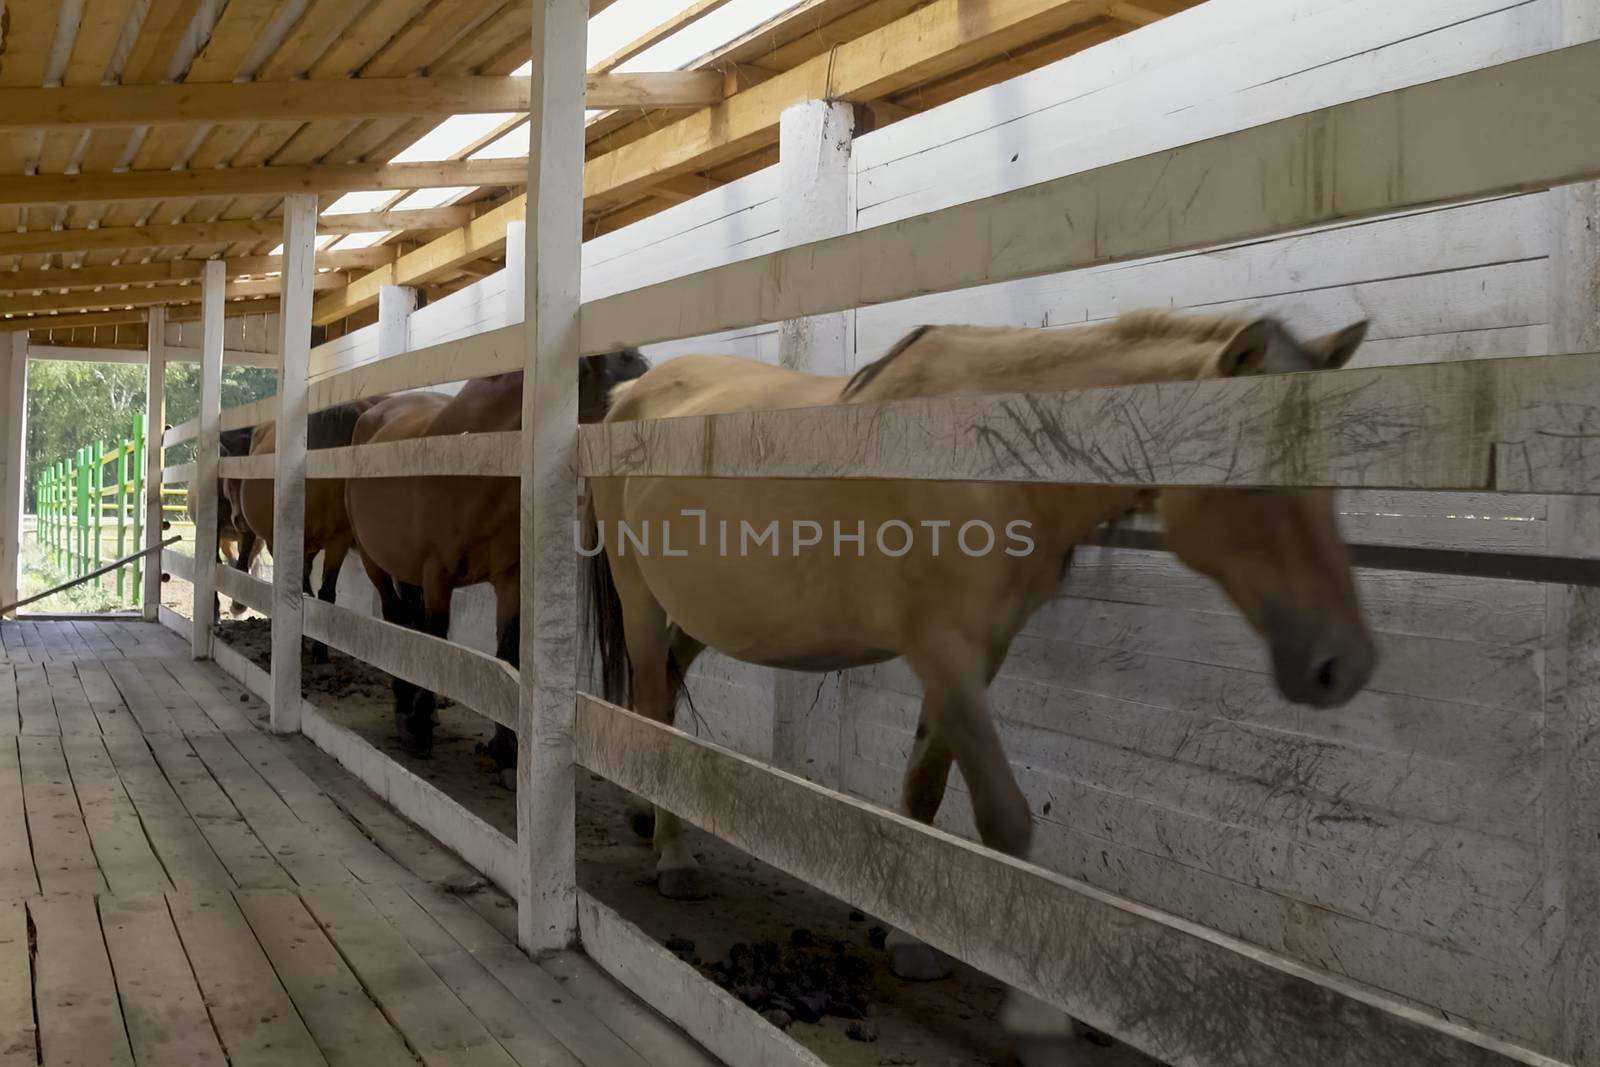 The horses are in the pen. Horses in a fenced space by nyrok